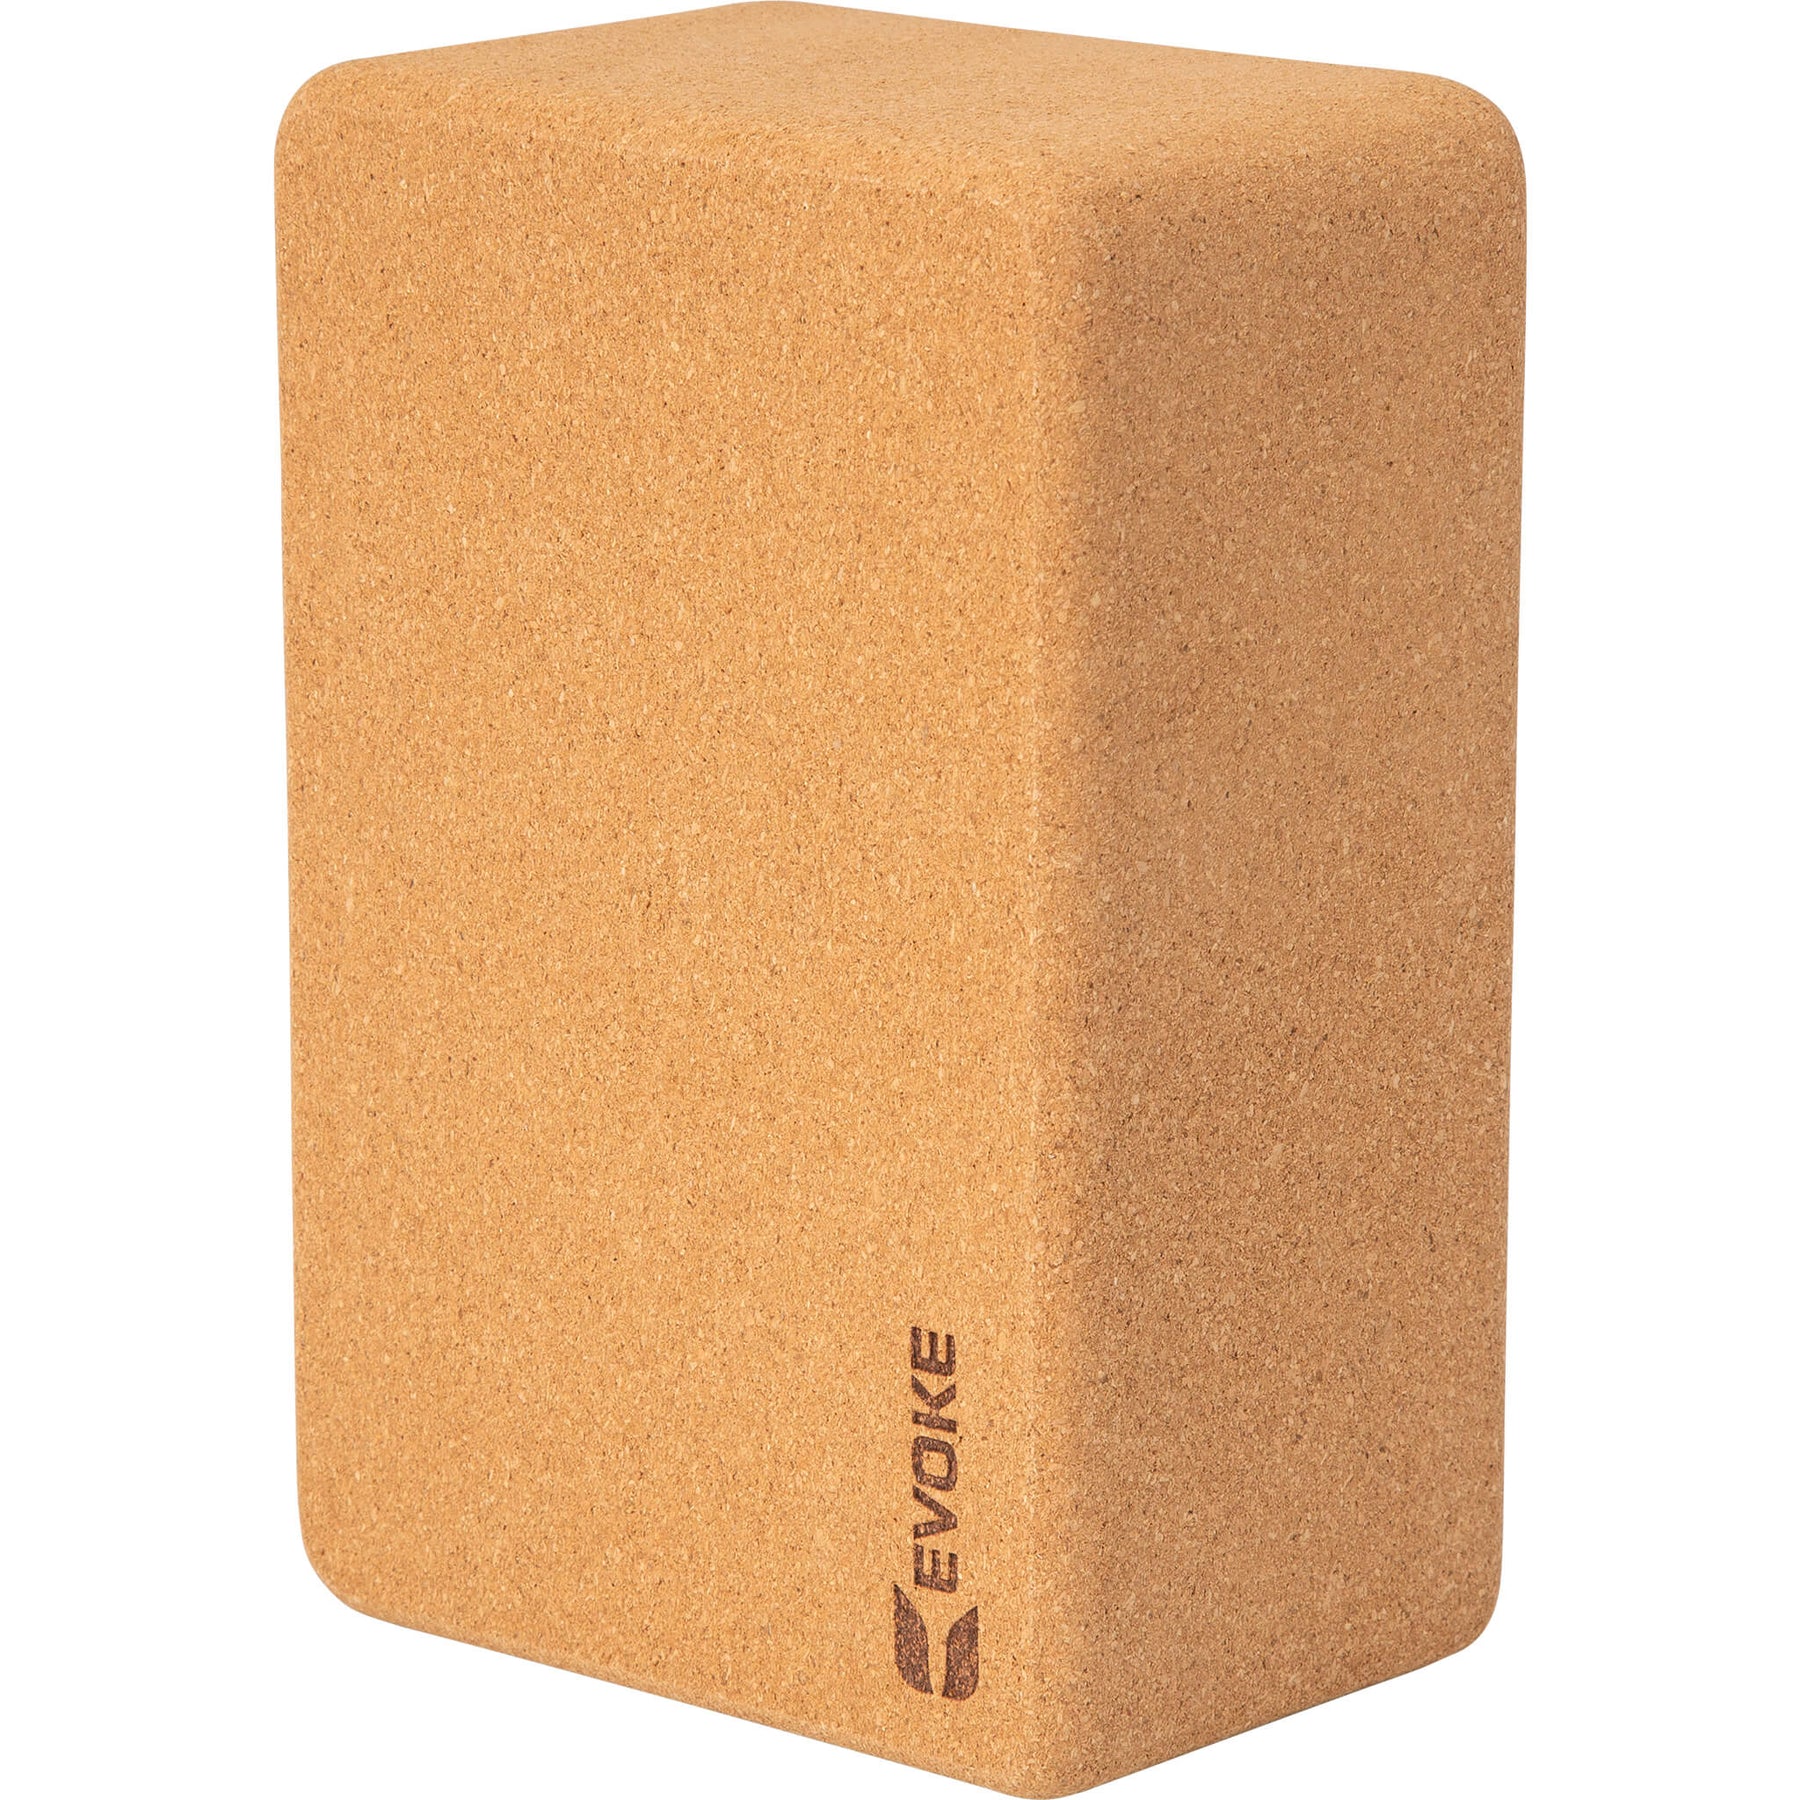 Cork Yoga Block - Physique Fitness Stores